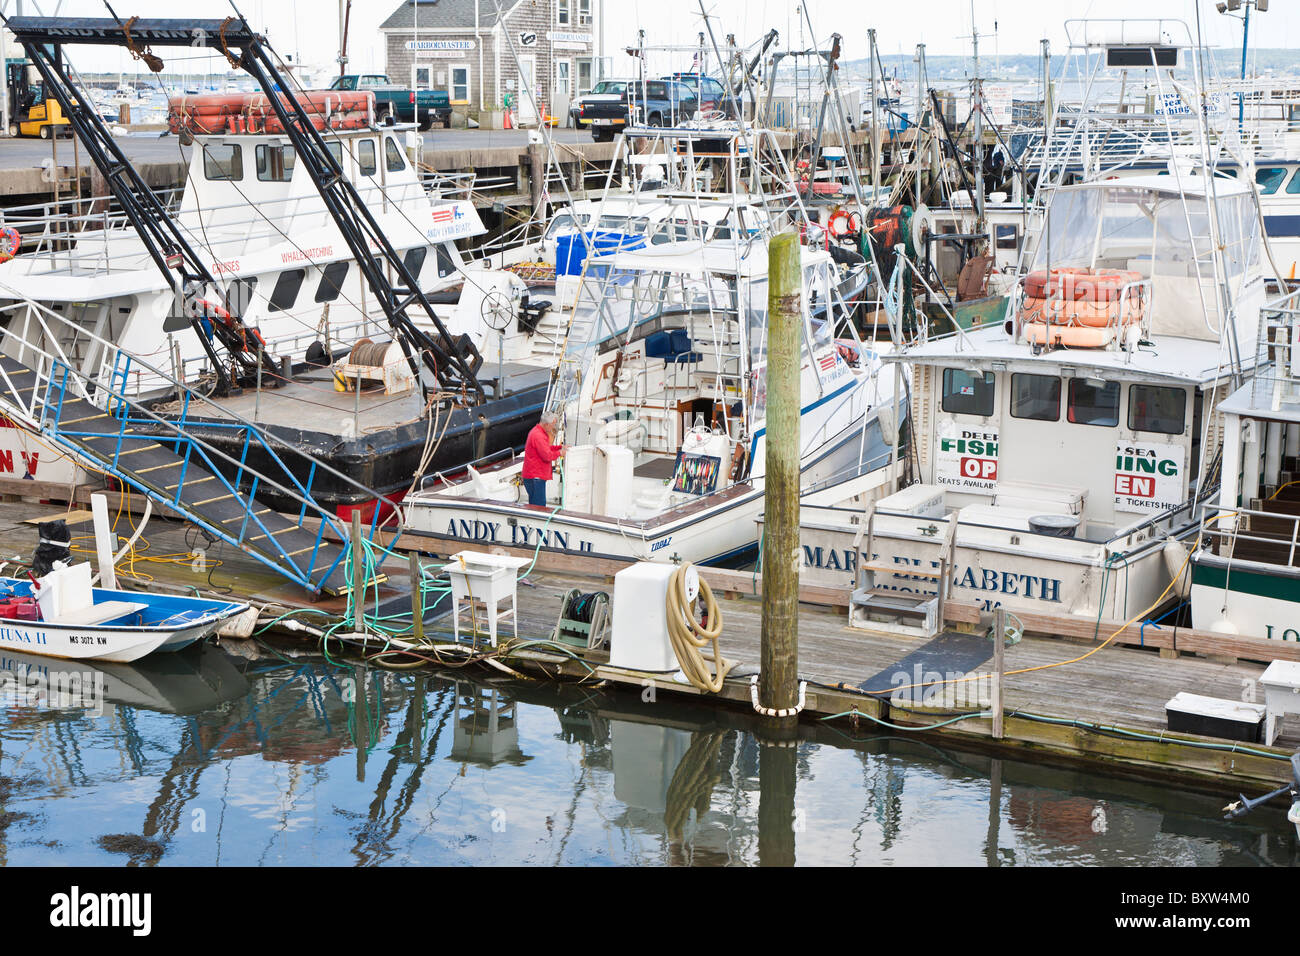 https://c8.alamy.com/comp/BXW4M0/commercial-fishing-boats-fill-the-docks-at-plymouth-harbor-in-plymouth-BXW4M0.jpg